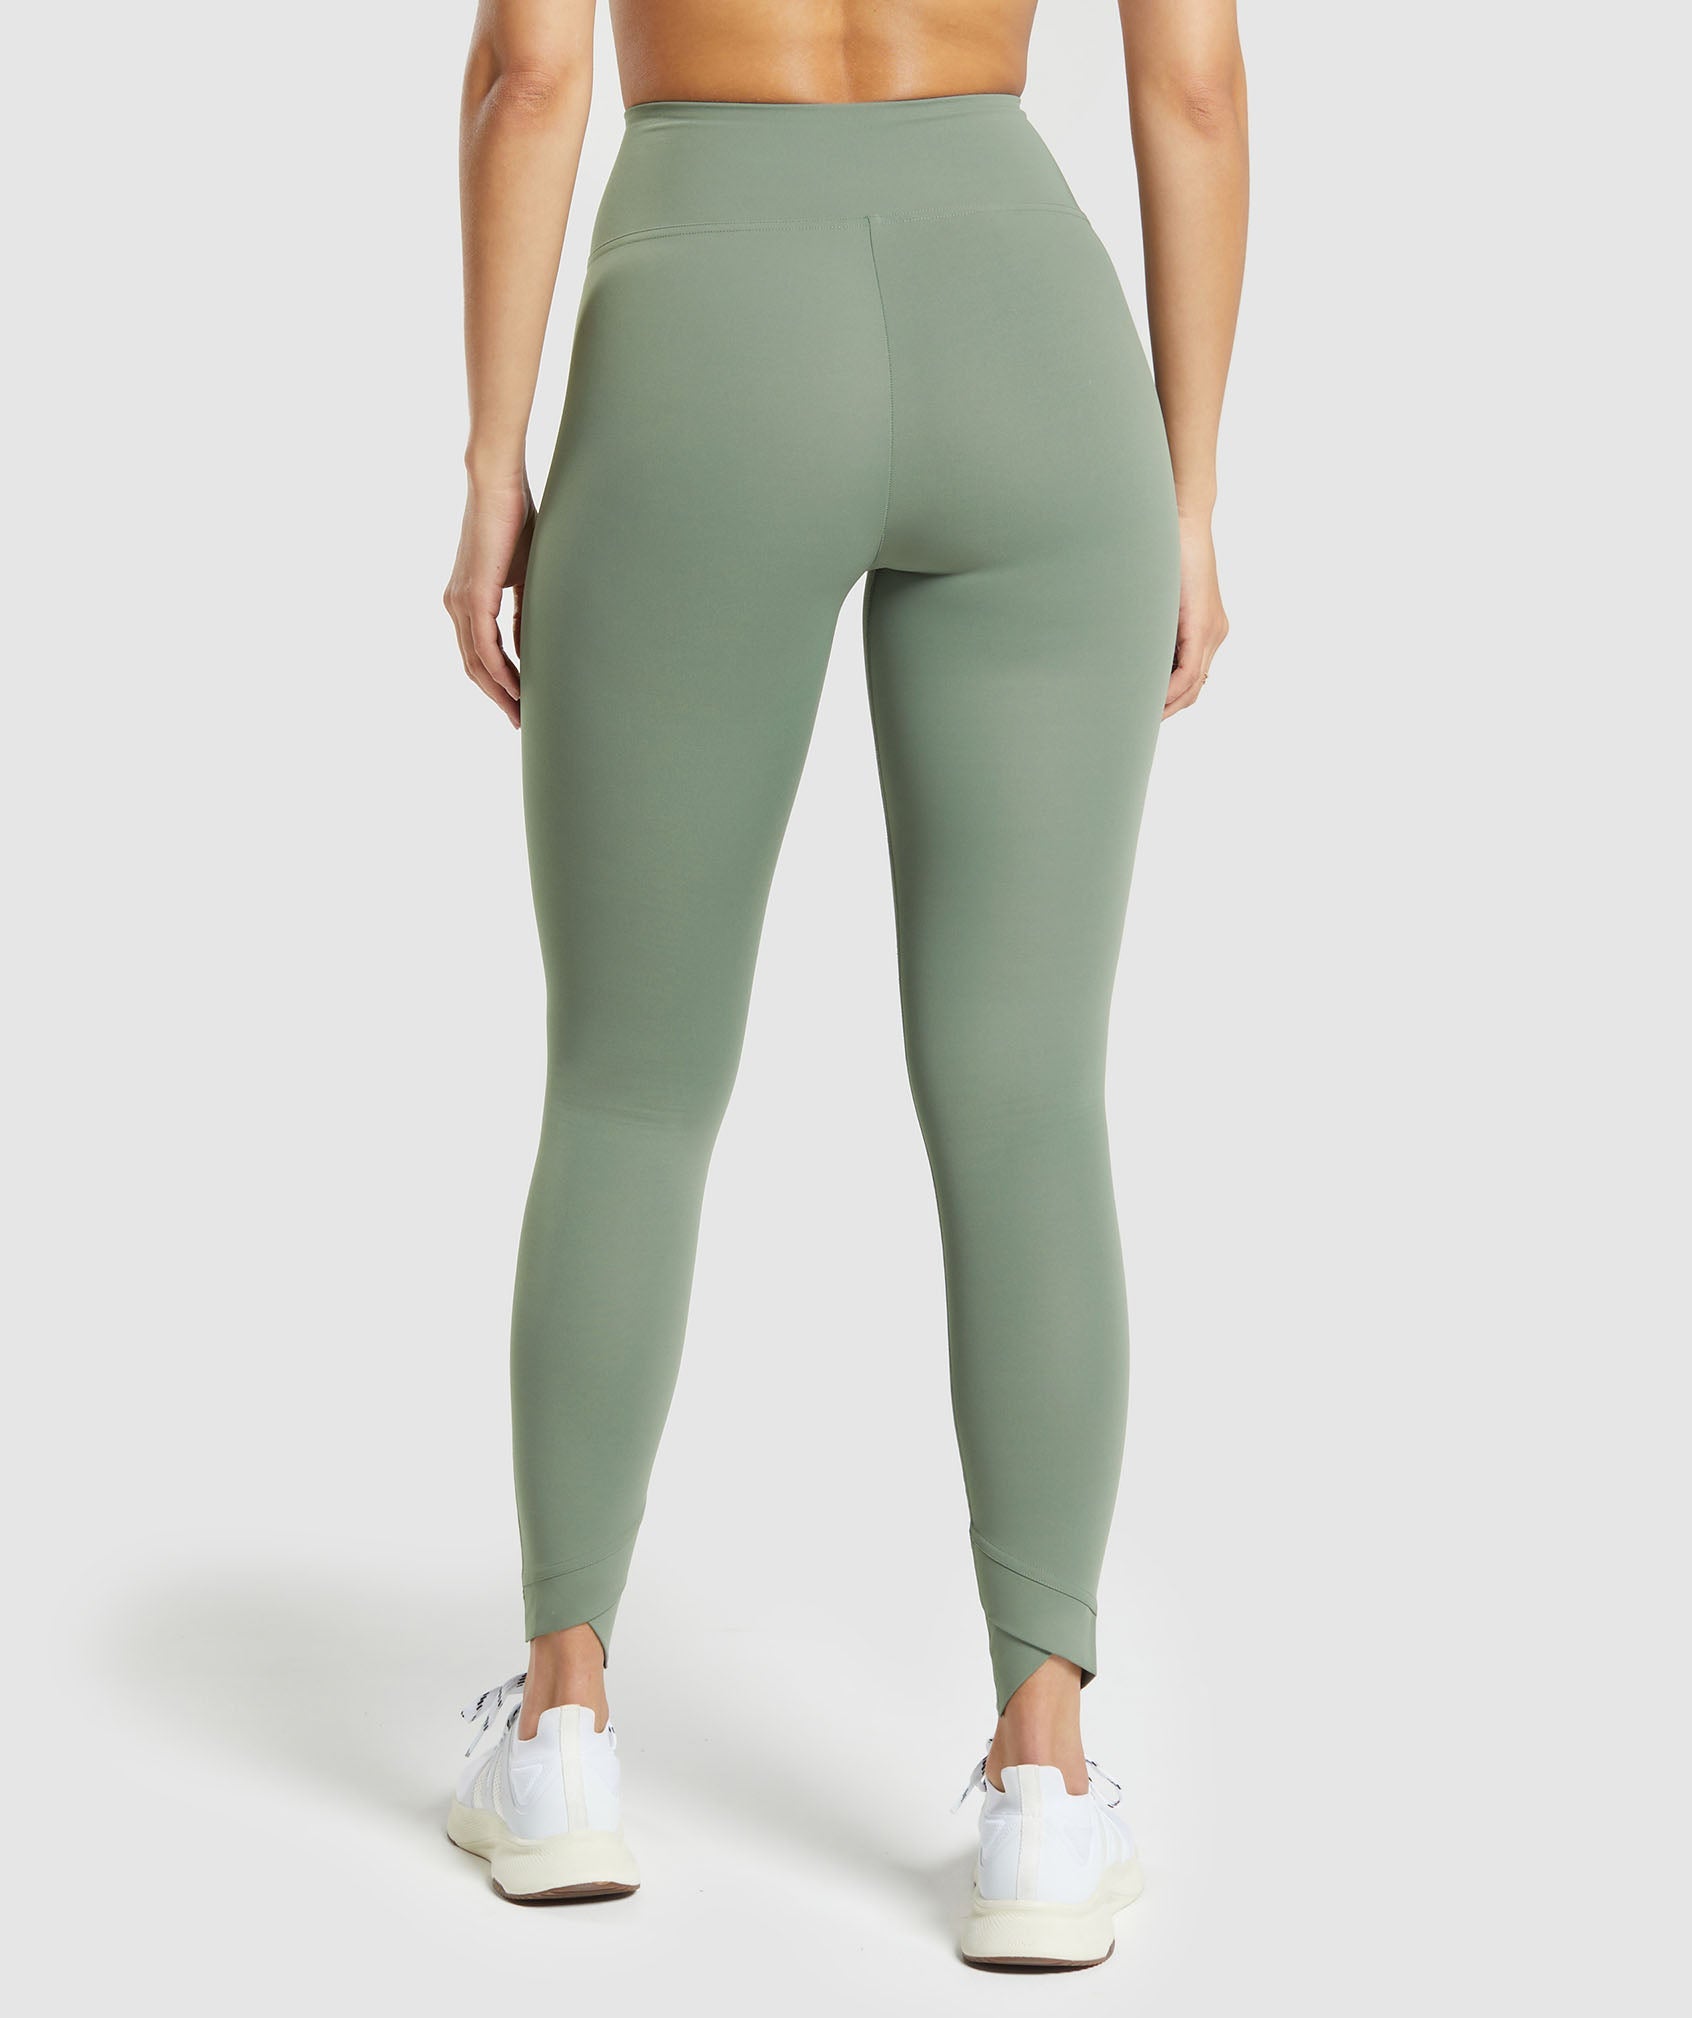 Crossover Leggings in Unit Green - view 2